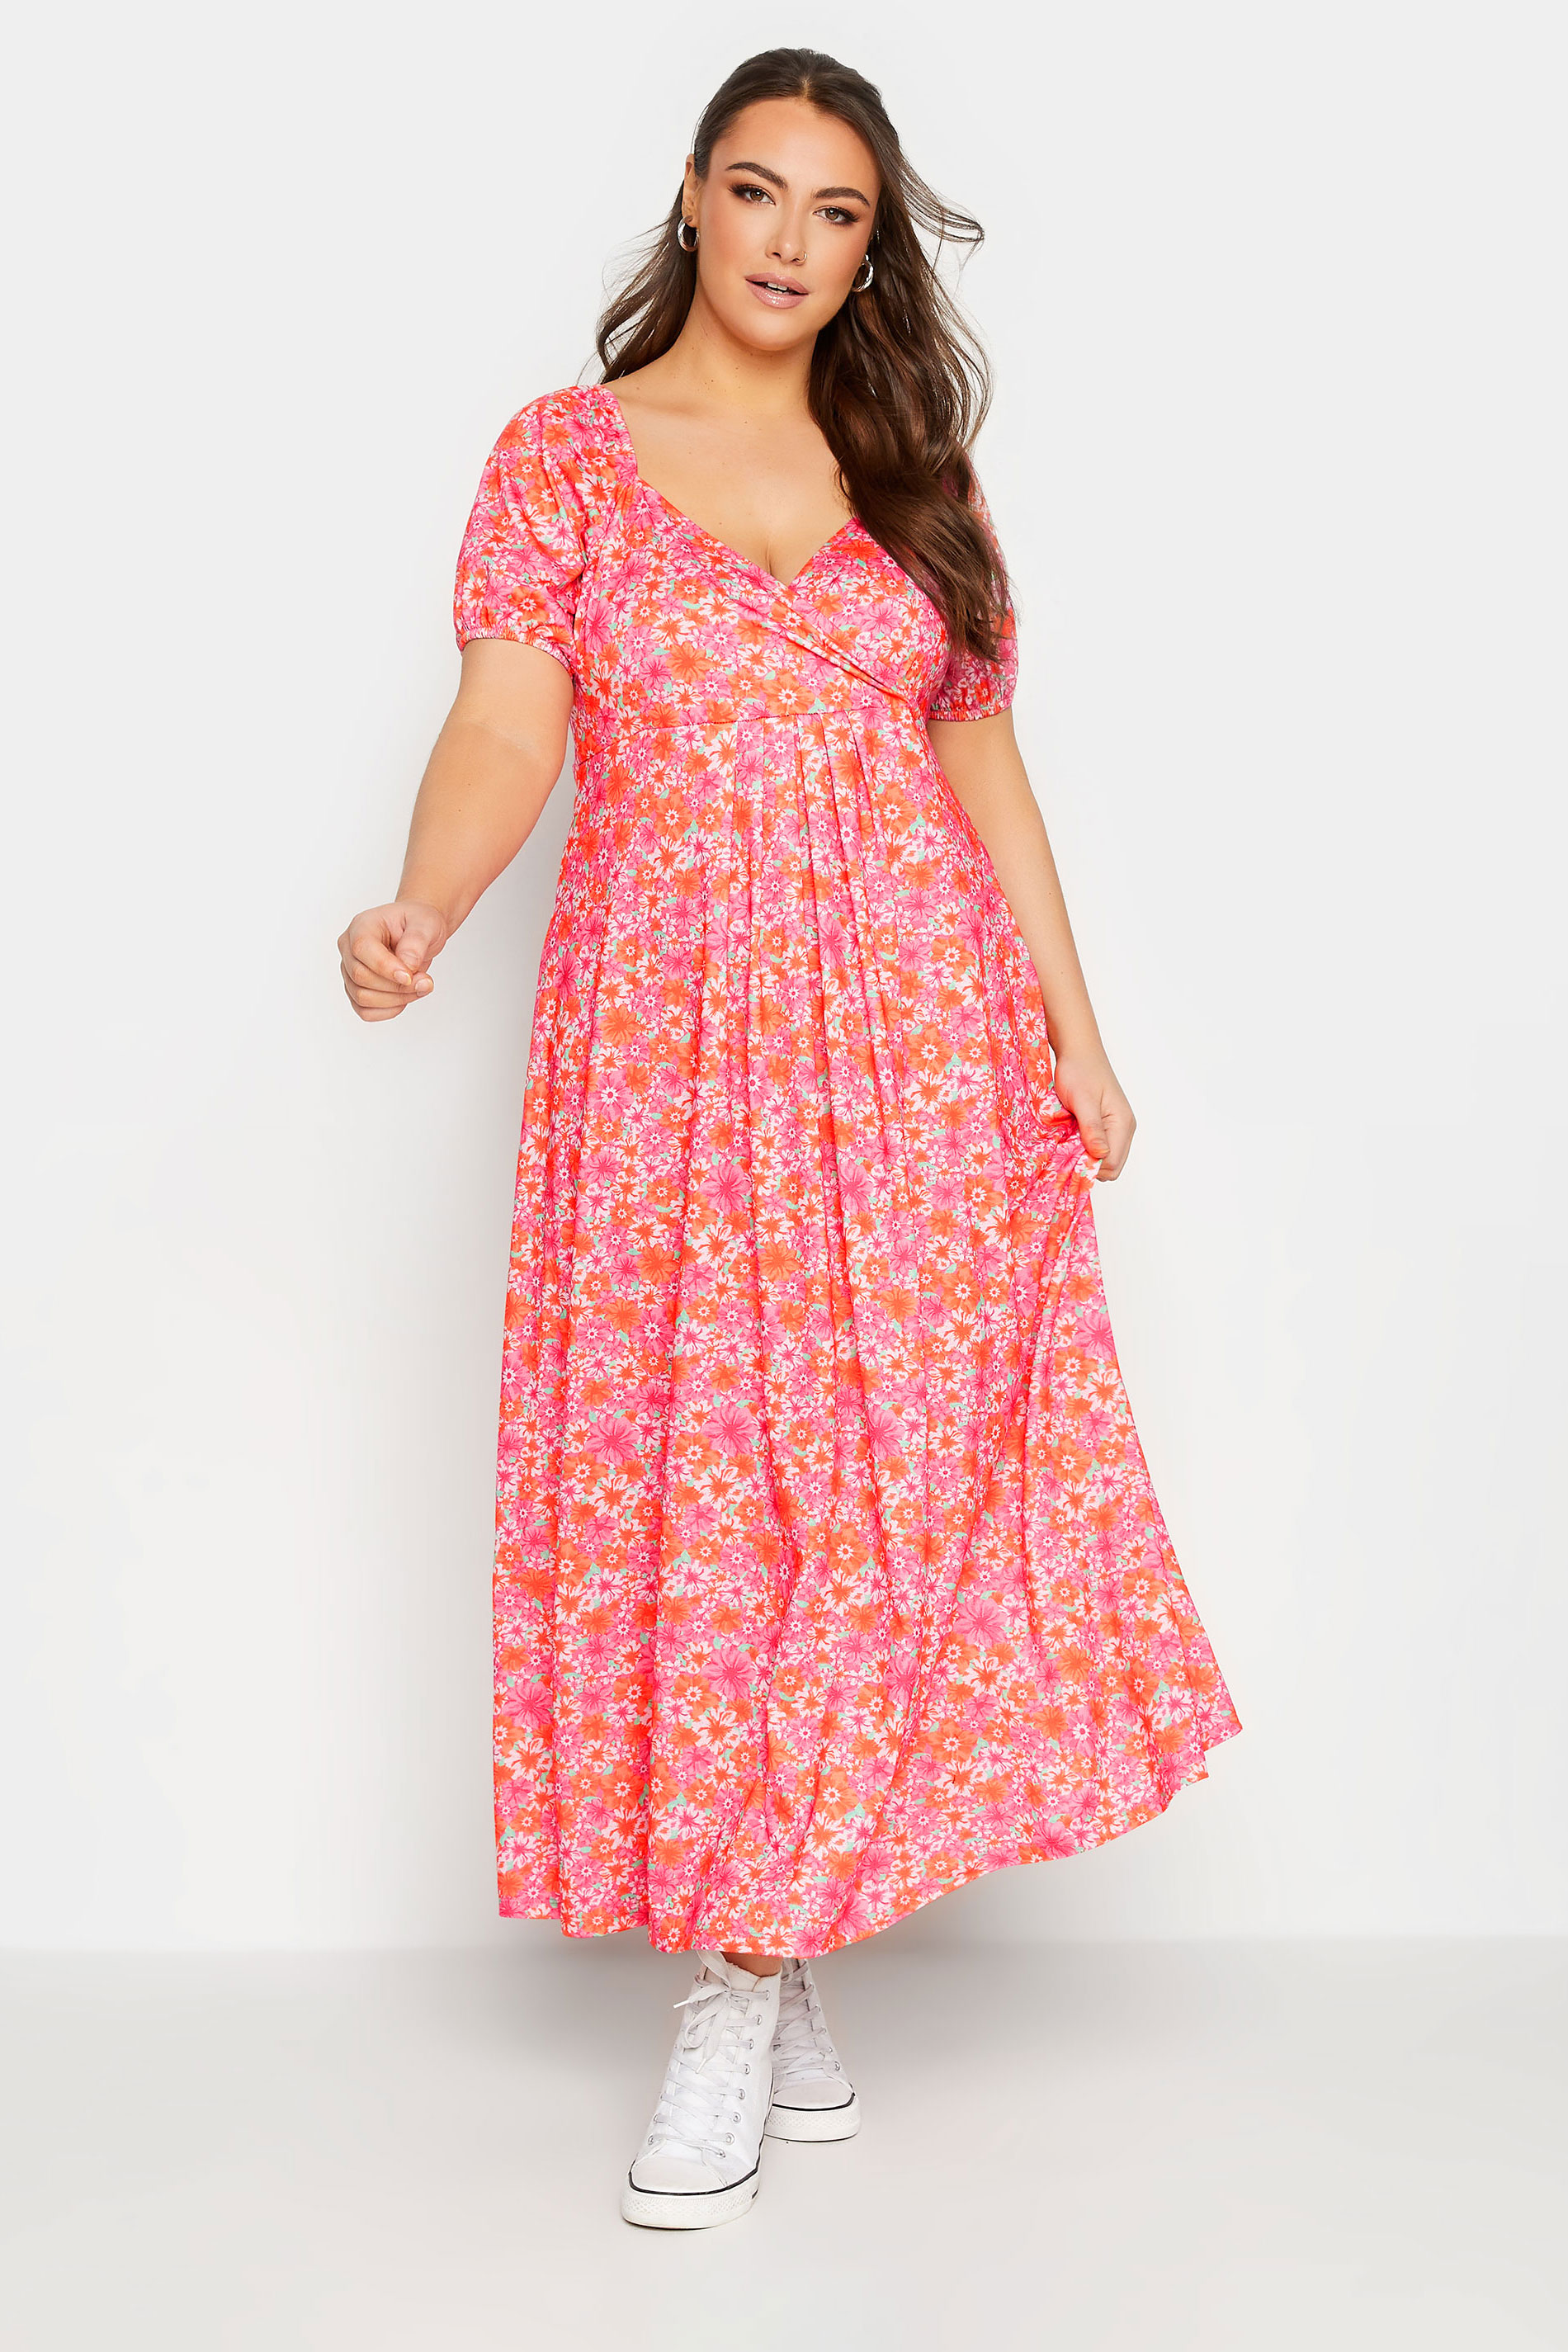 LIMITED COLLECTION Curve Plus Size Pink Floral Wrap Maxi Dress | Yours Clothing  1